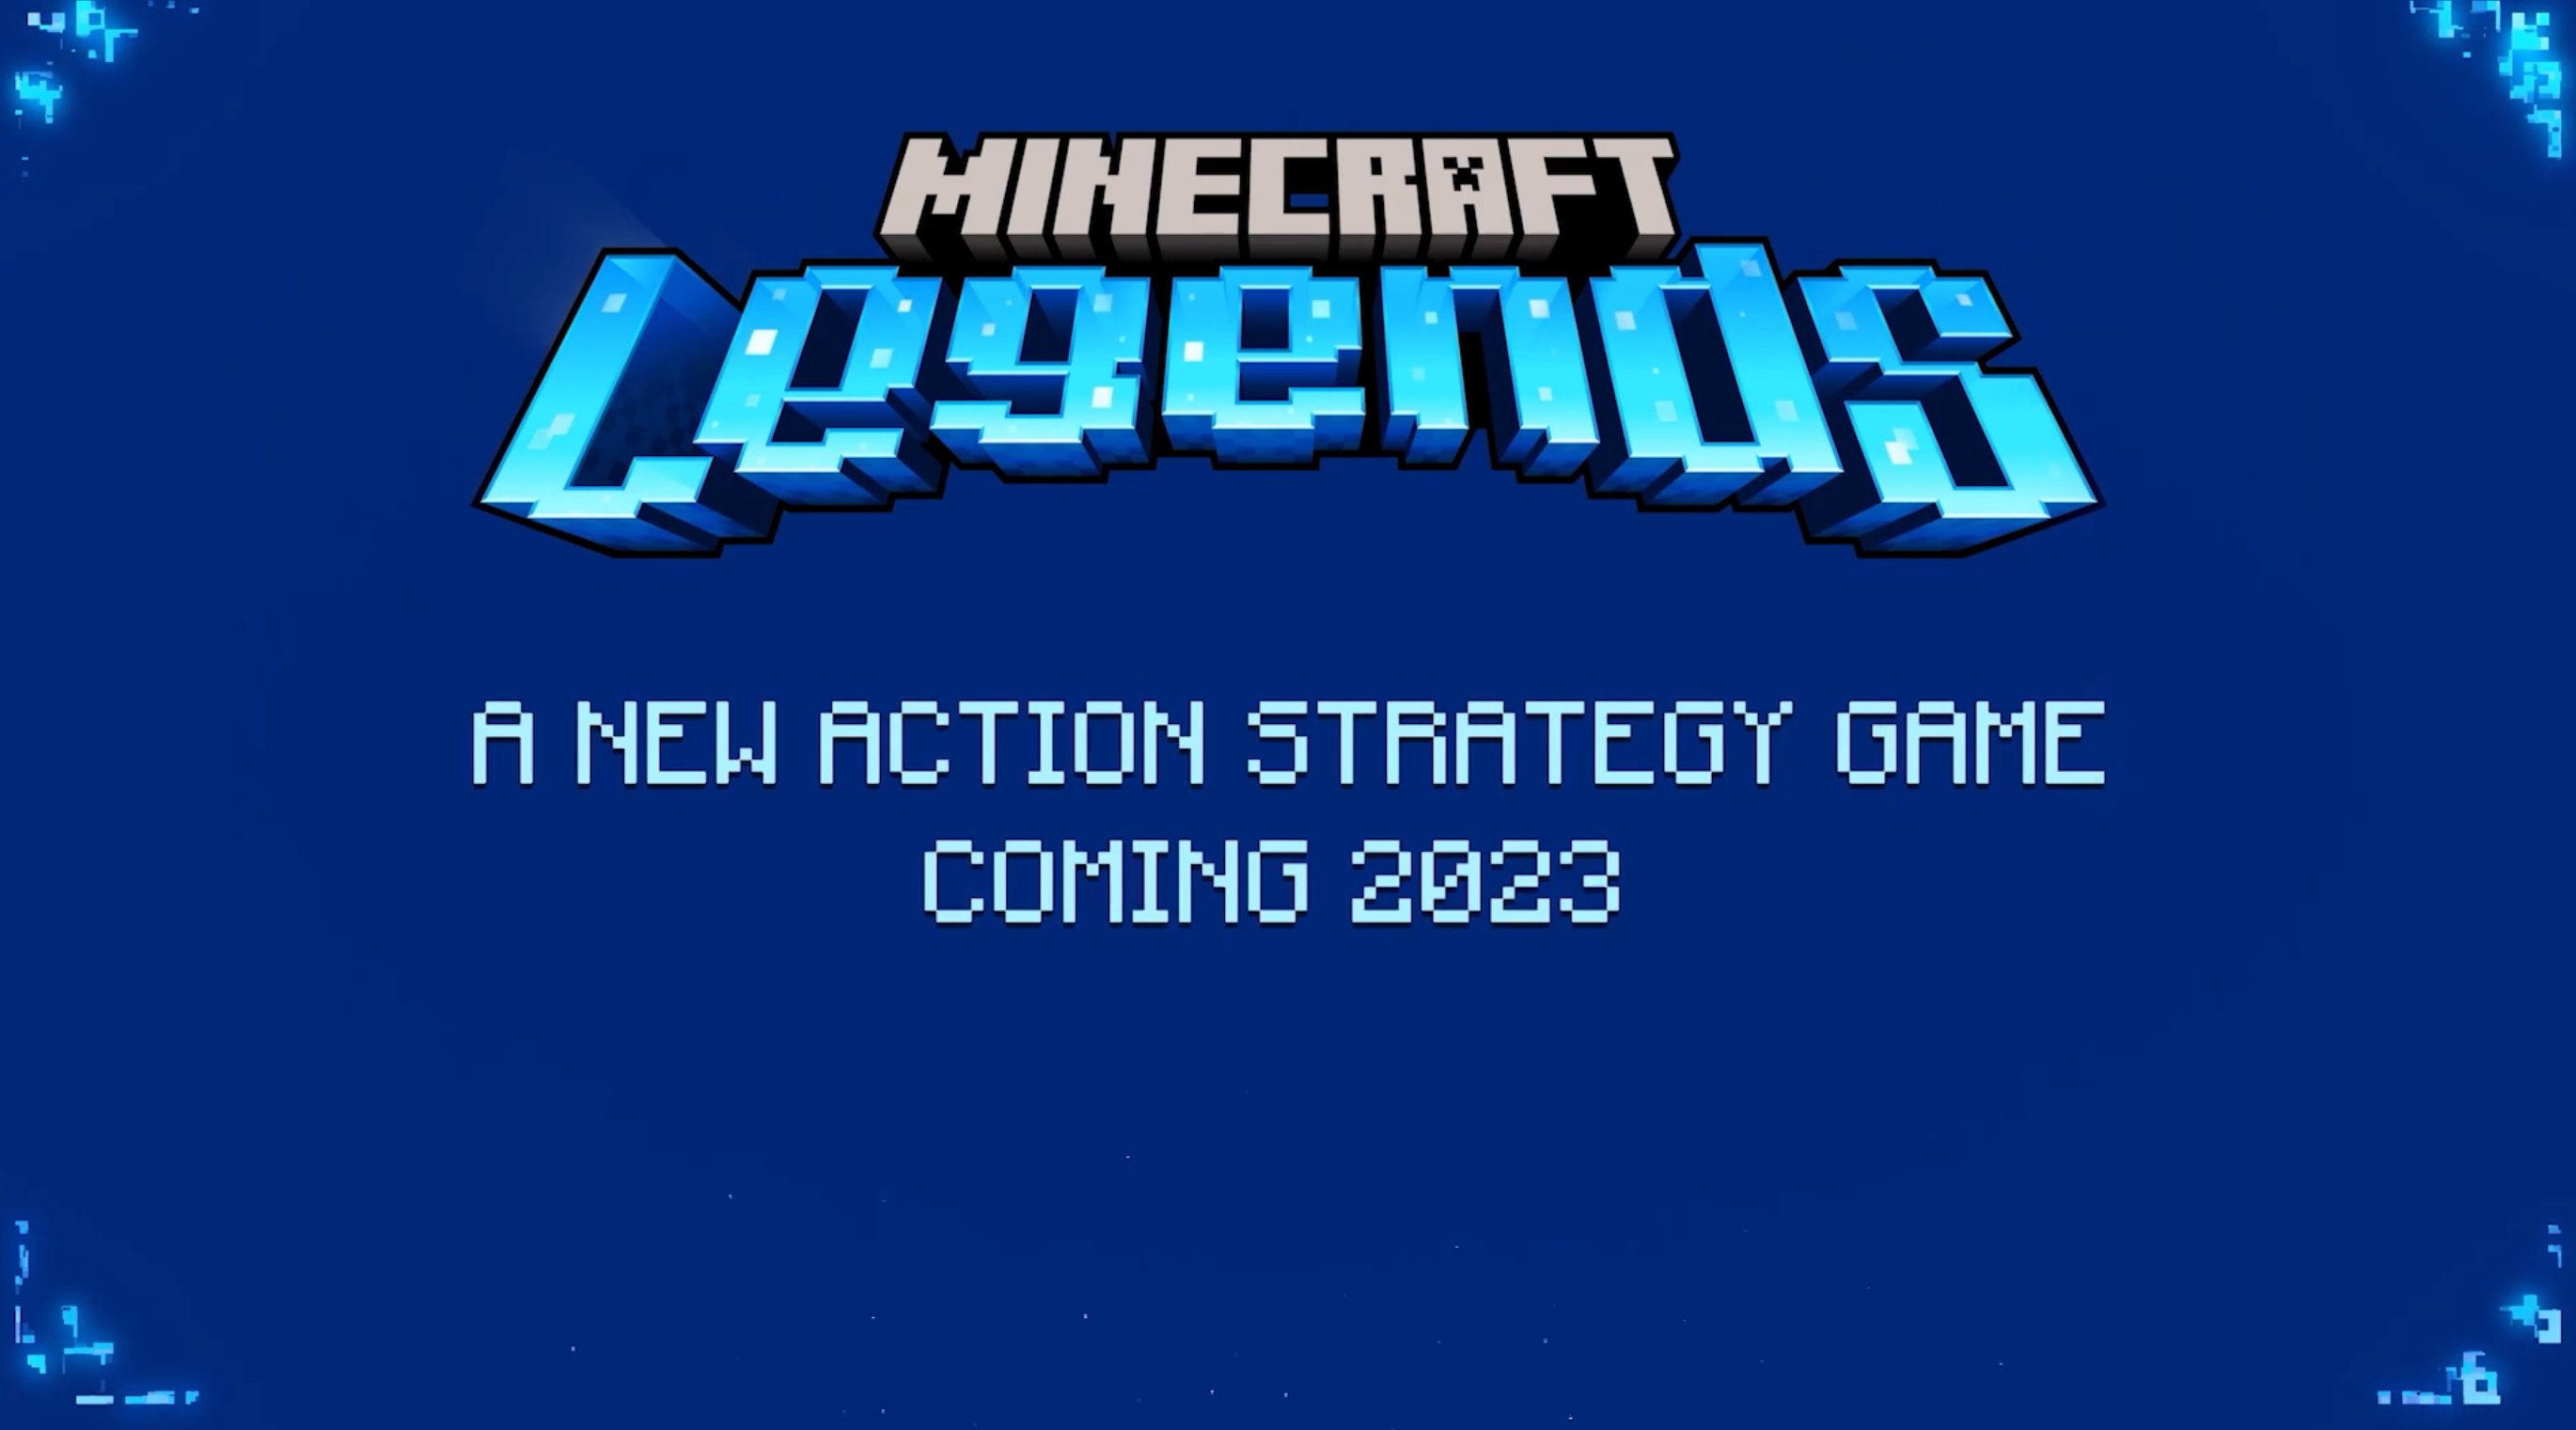 Minecraft Legends, An Action Strategy Game, Coming In 2023 To Xbox